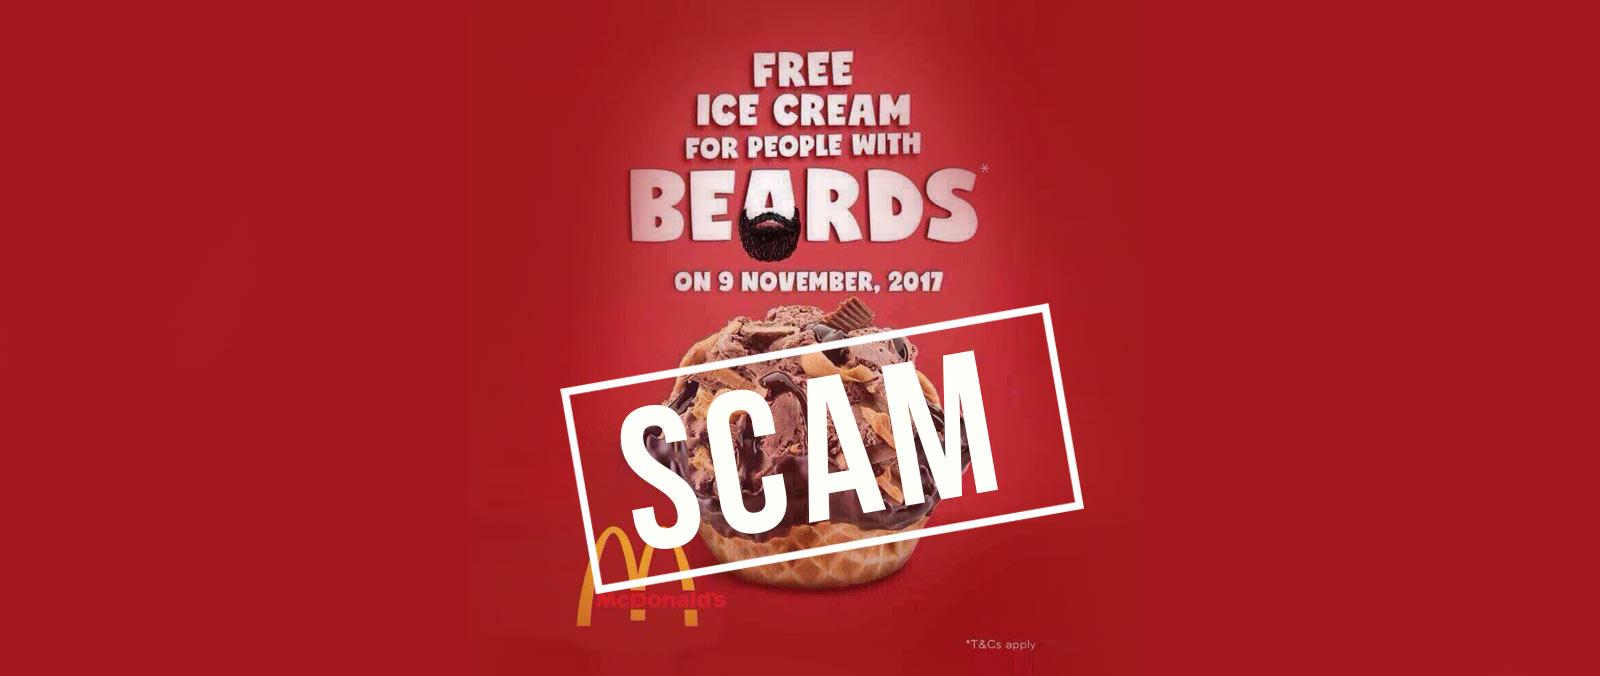 Free McD Ice Cream for people with beards Scam 